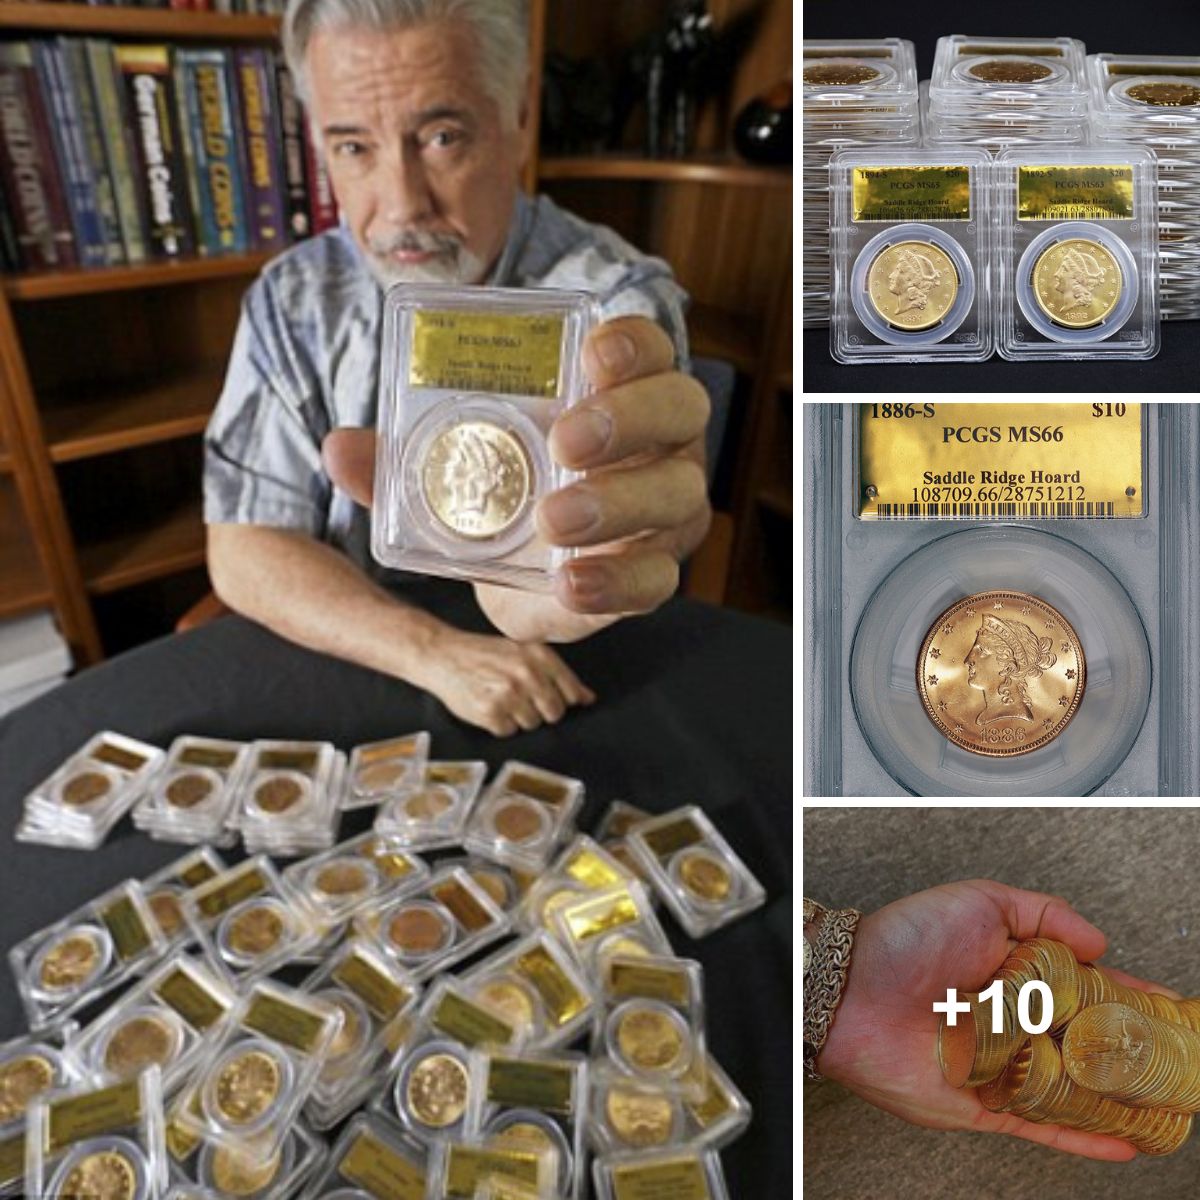 California couple strikes gold after finding $10million of 19th century coins buried on their property